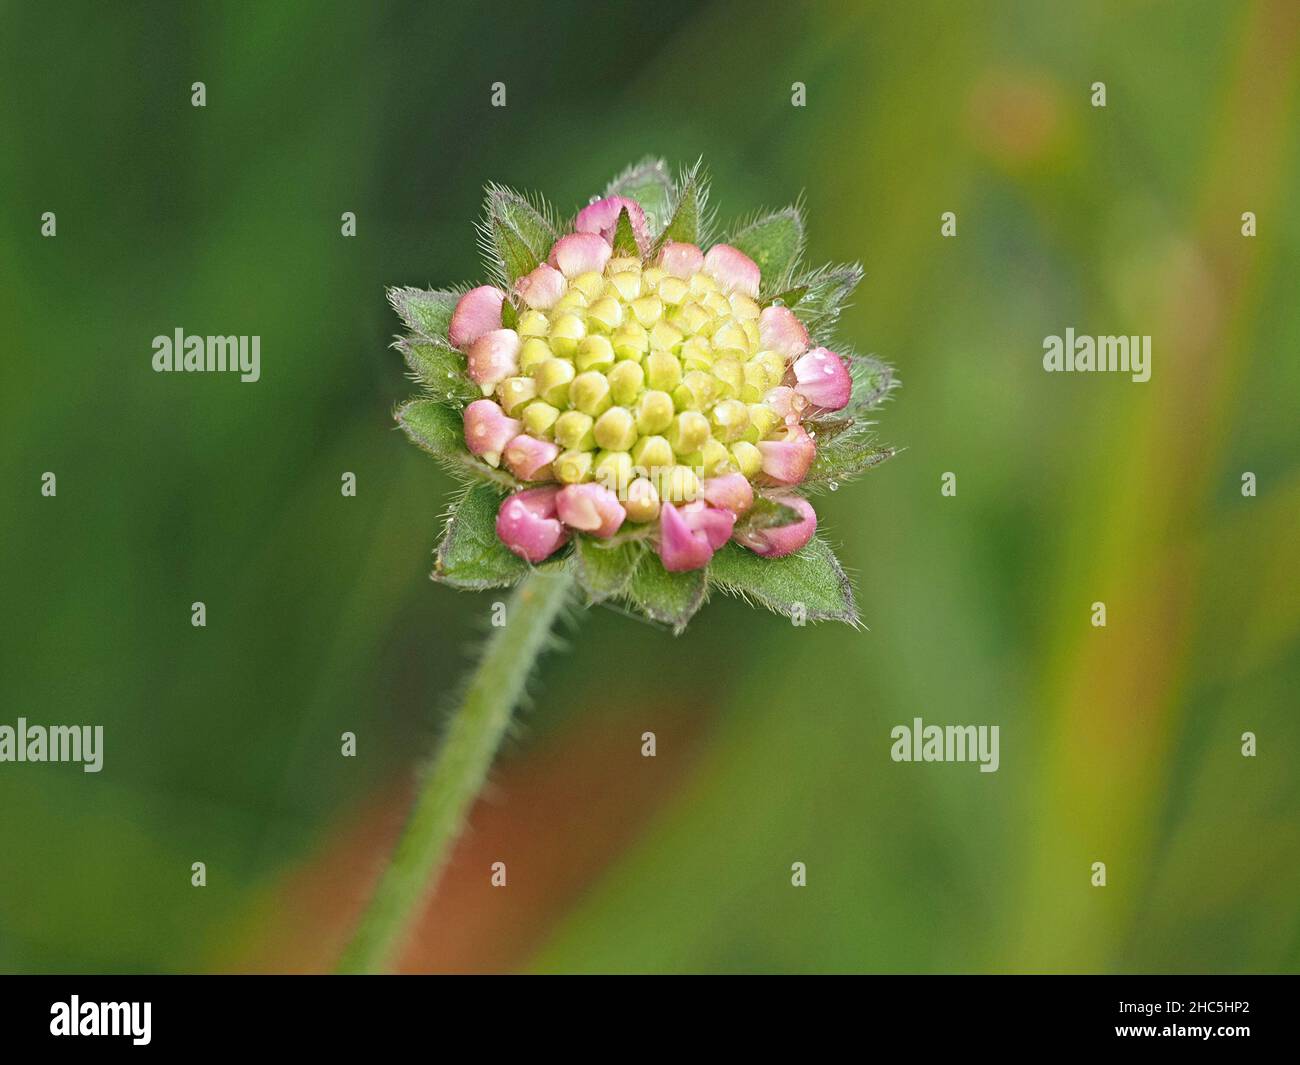 pink and yellow compound flowerhead of Field Scabious, (Knautia Arvensis) in bud with protruding hairy green sepals in Cumbria, England, UK Stock Photo